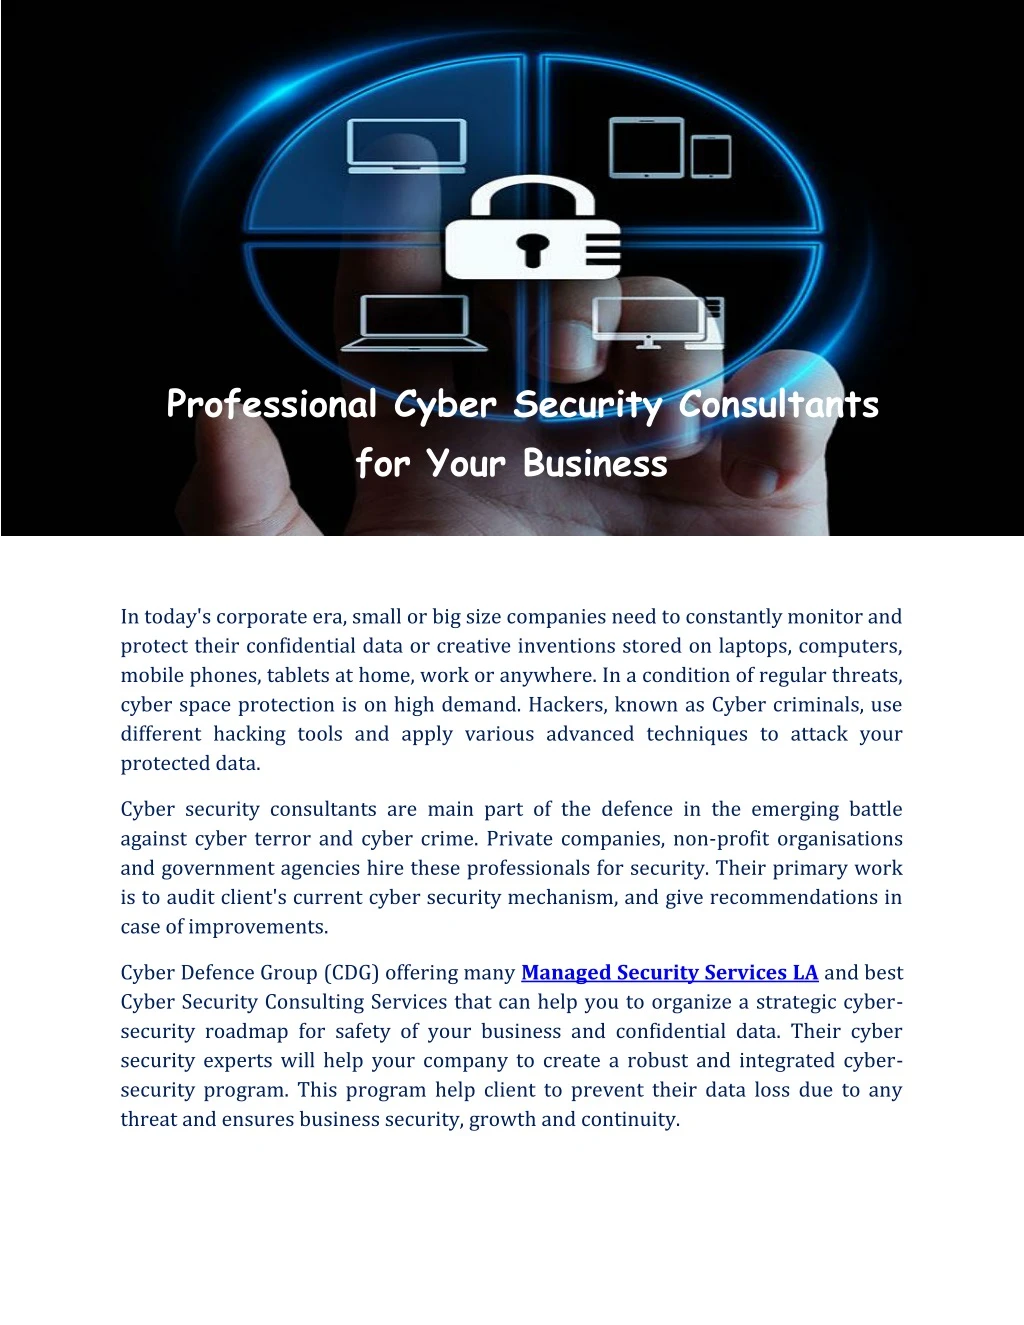 professional cyber security consultants for your